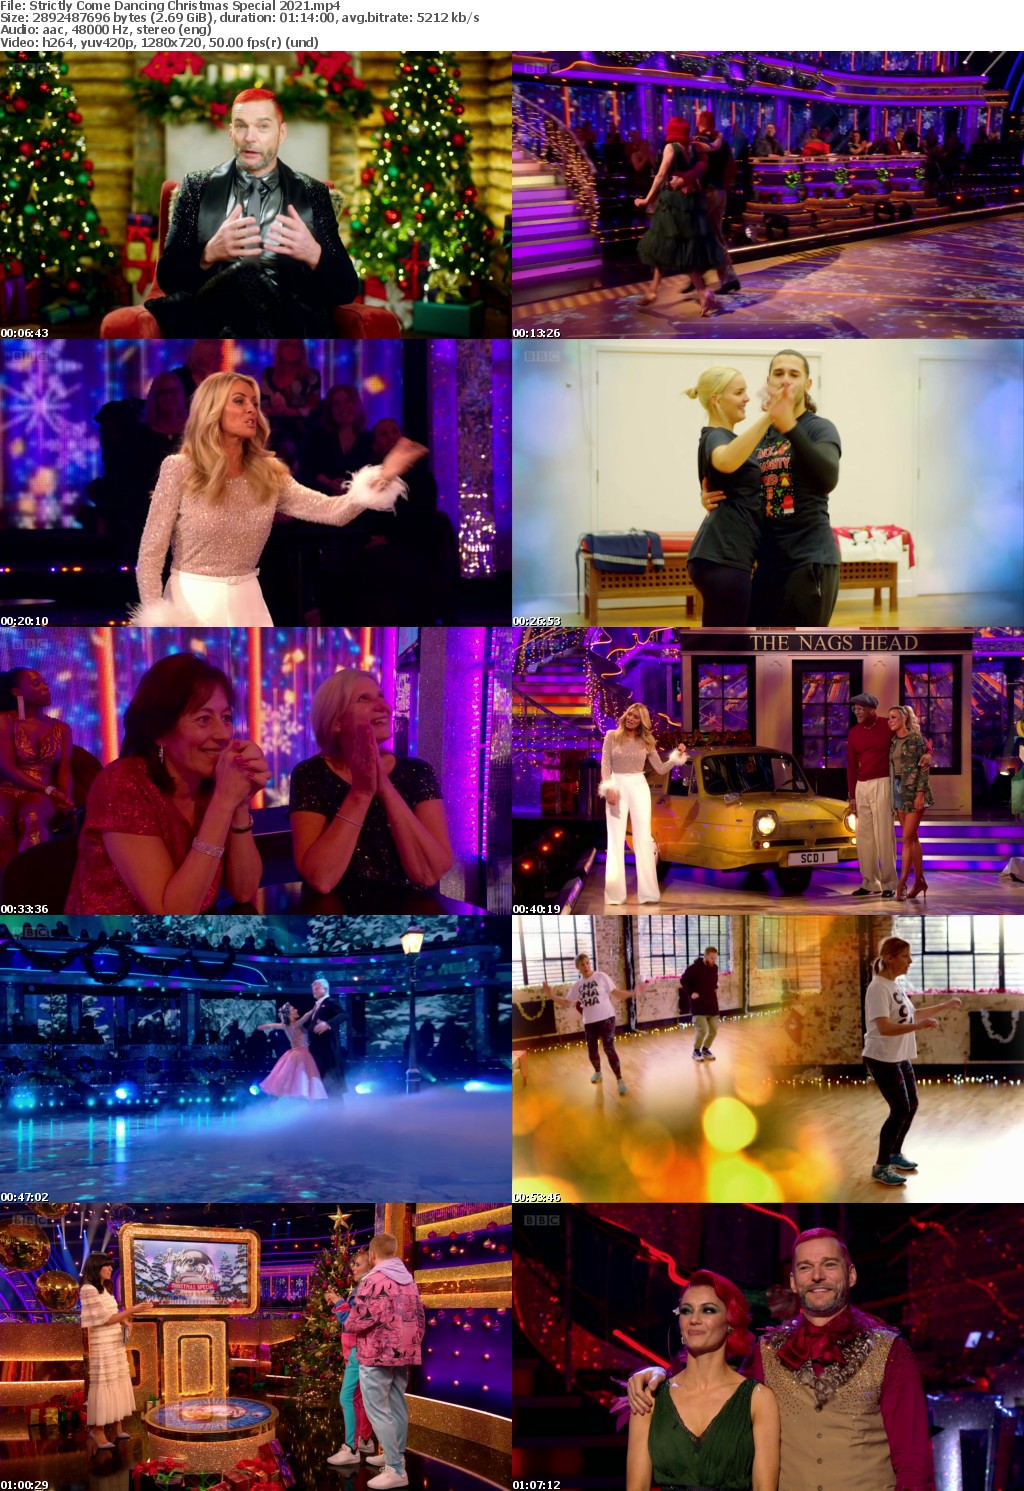 Strictly Come Dancing Christmas Special 2021 (1280x720p HD, 50fps, soft Eng subs)